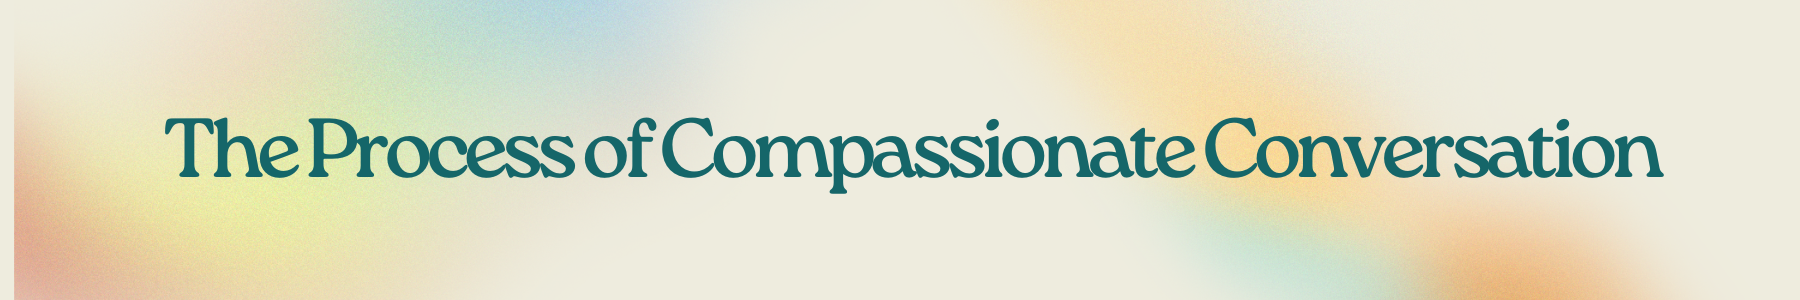 The Process of Compassionate Conversation